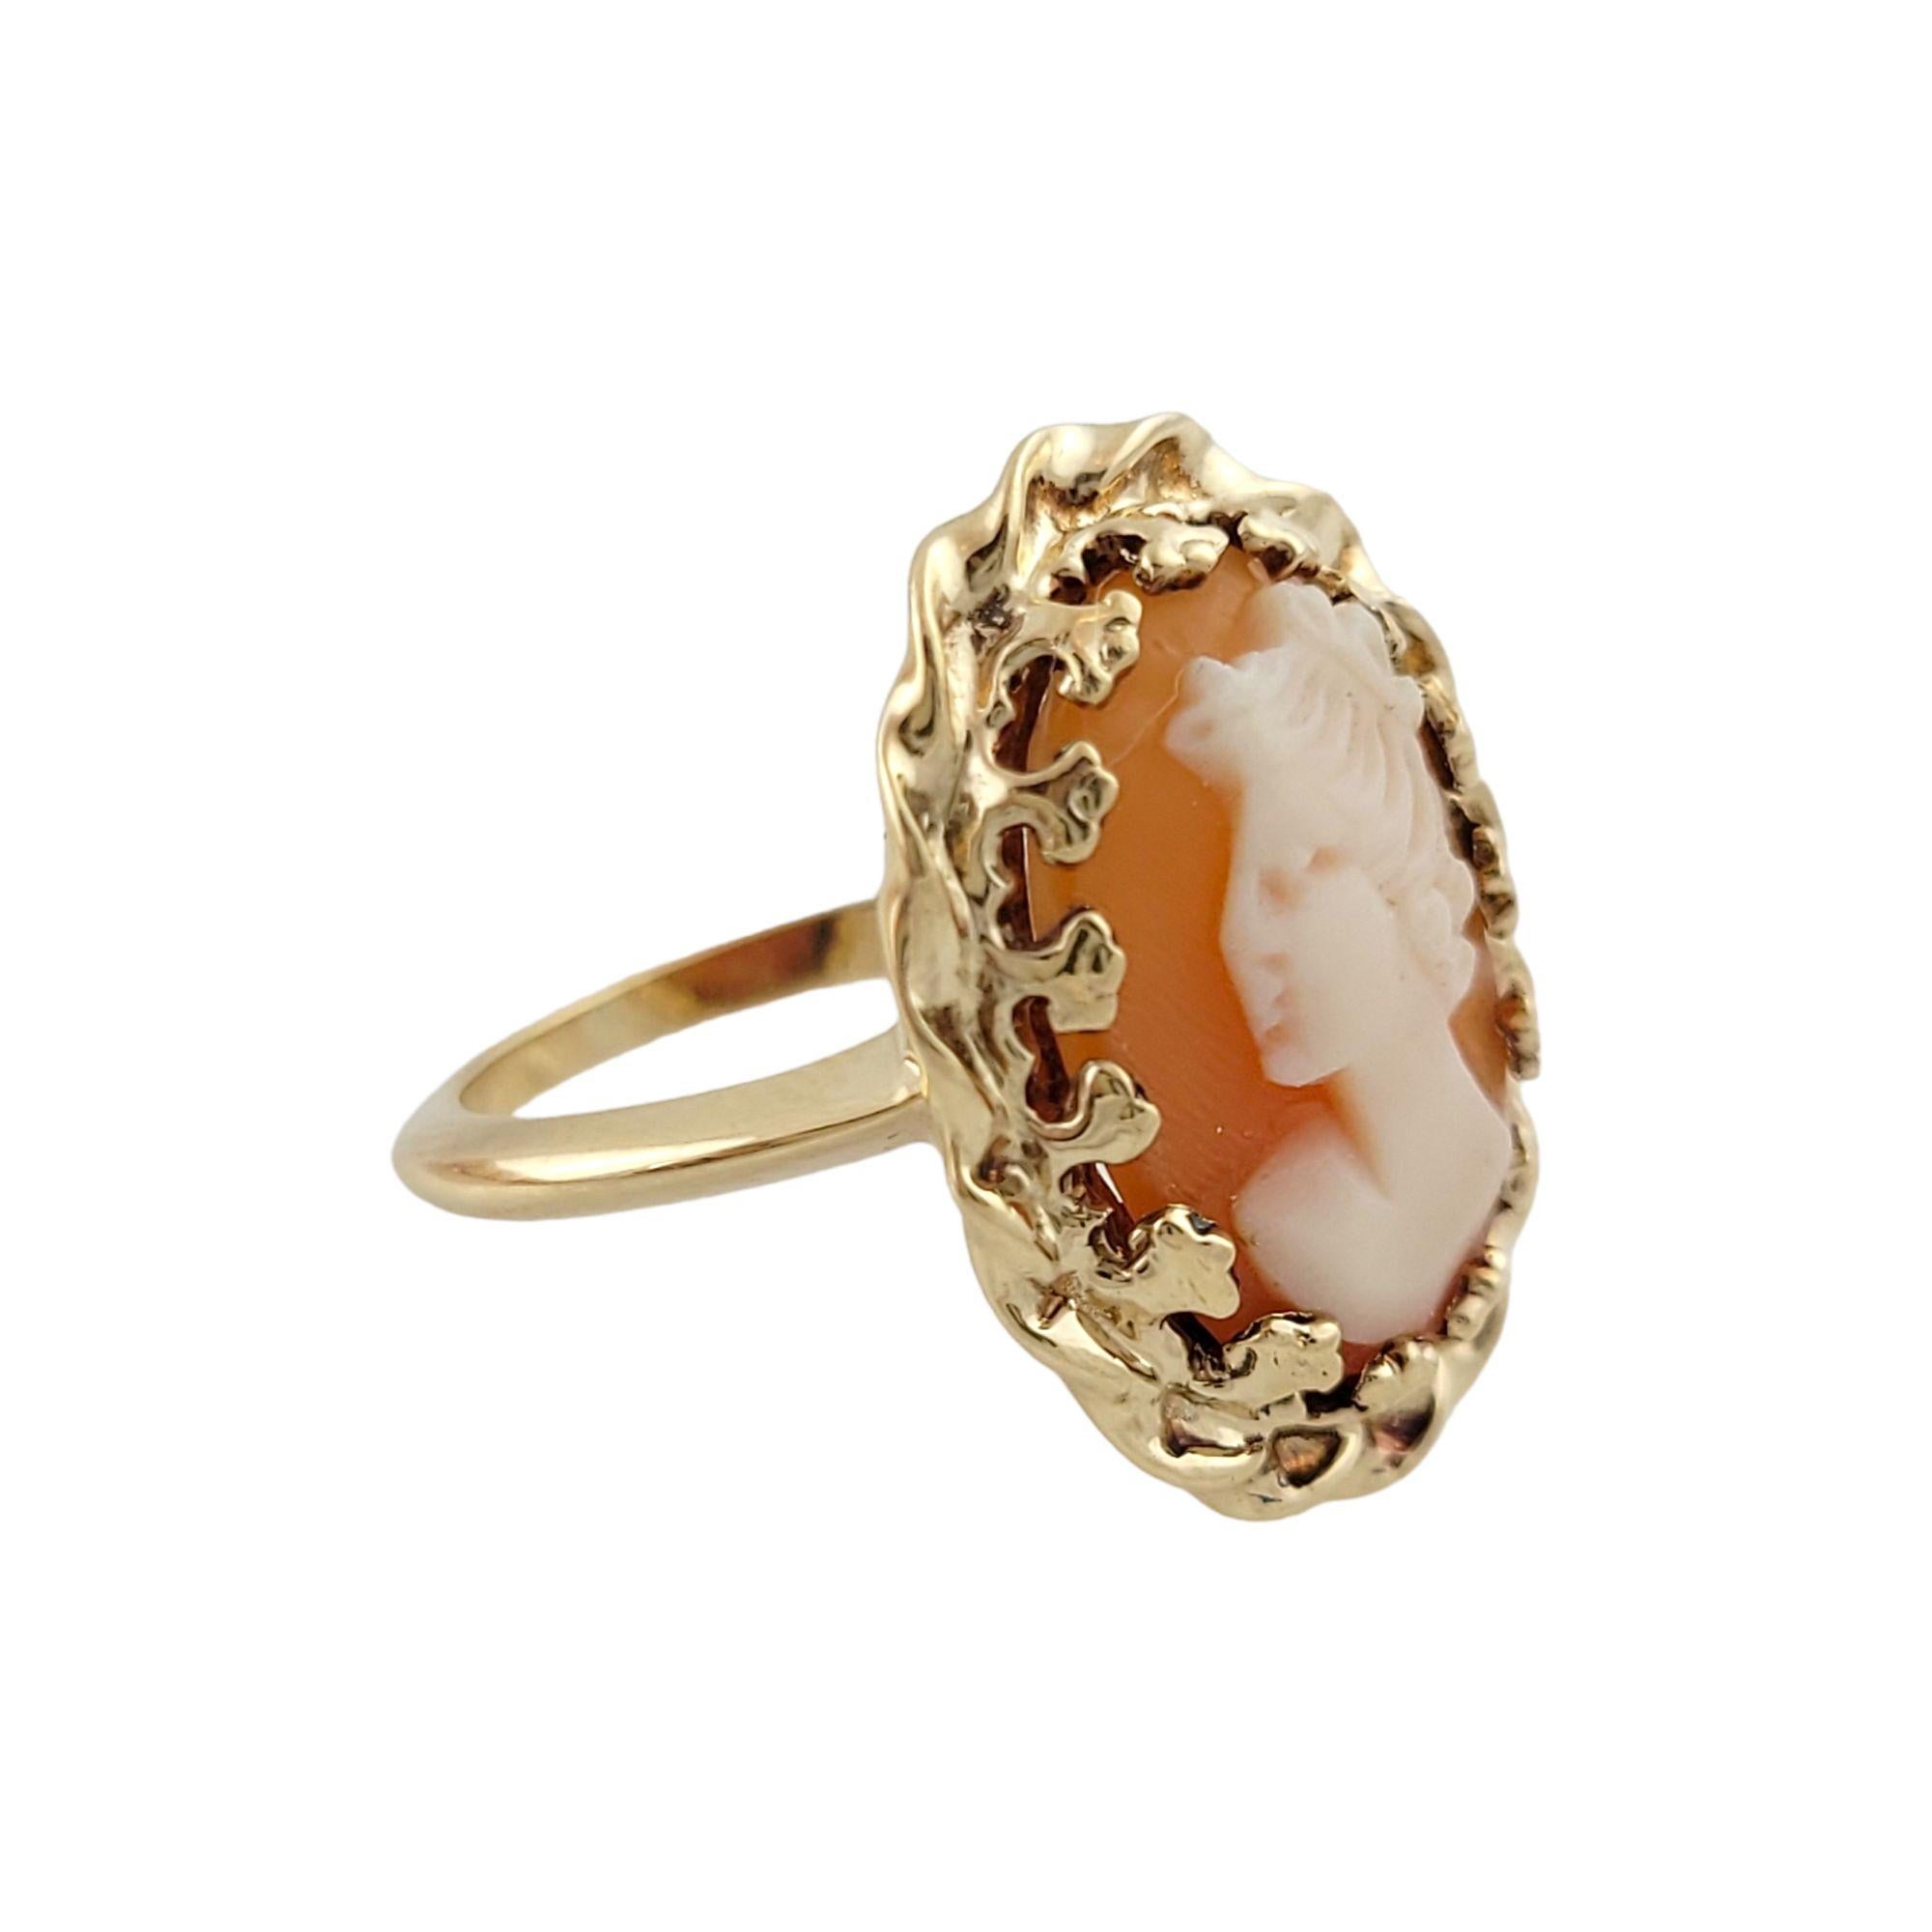 Vintage 10K Yellow Gold Cameo Ring Size 4

Beautiful 10K yellow gold cameo ring!

Size: 4
Shank: 1.5mm
Front: 19mm X 15mm X 5mm

Weight: 3.6 g/ 2.3 dwt

Hallmark: 10K

Very good condition, professionally polished.

Will come packaged in a gift box